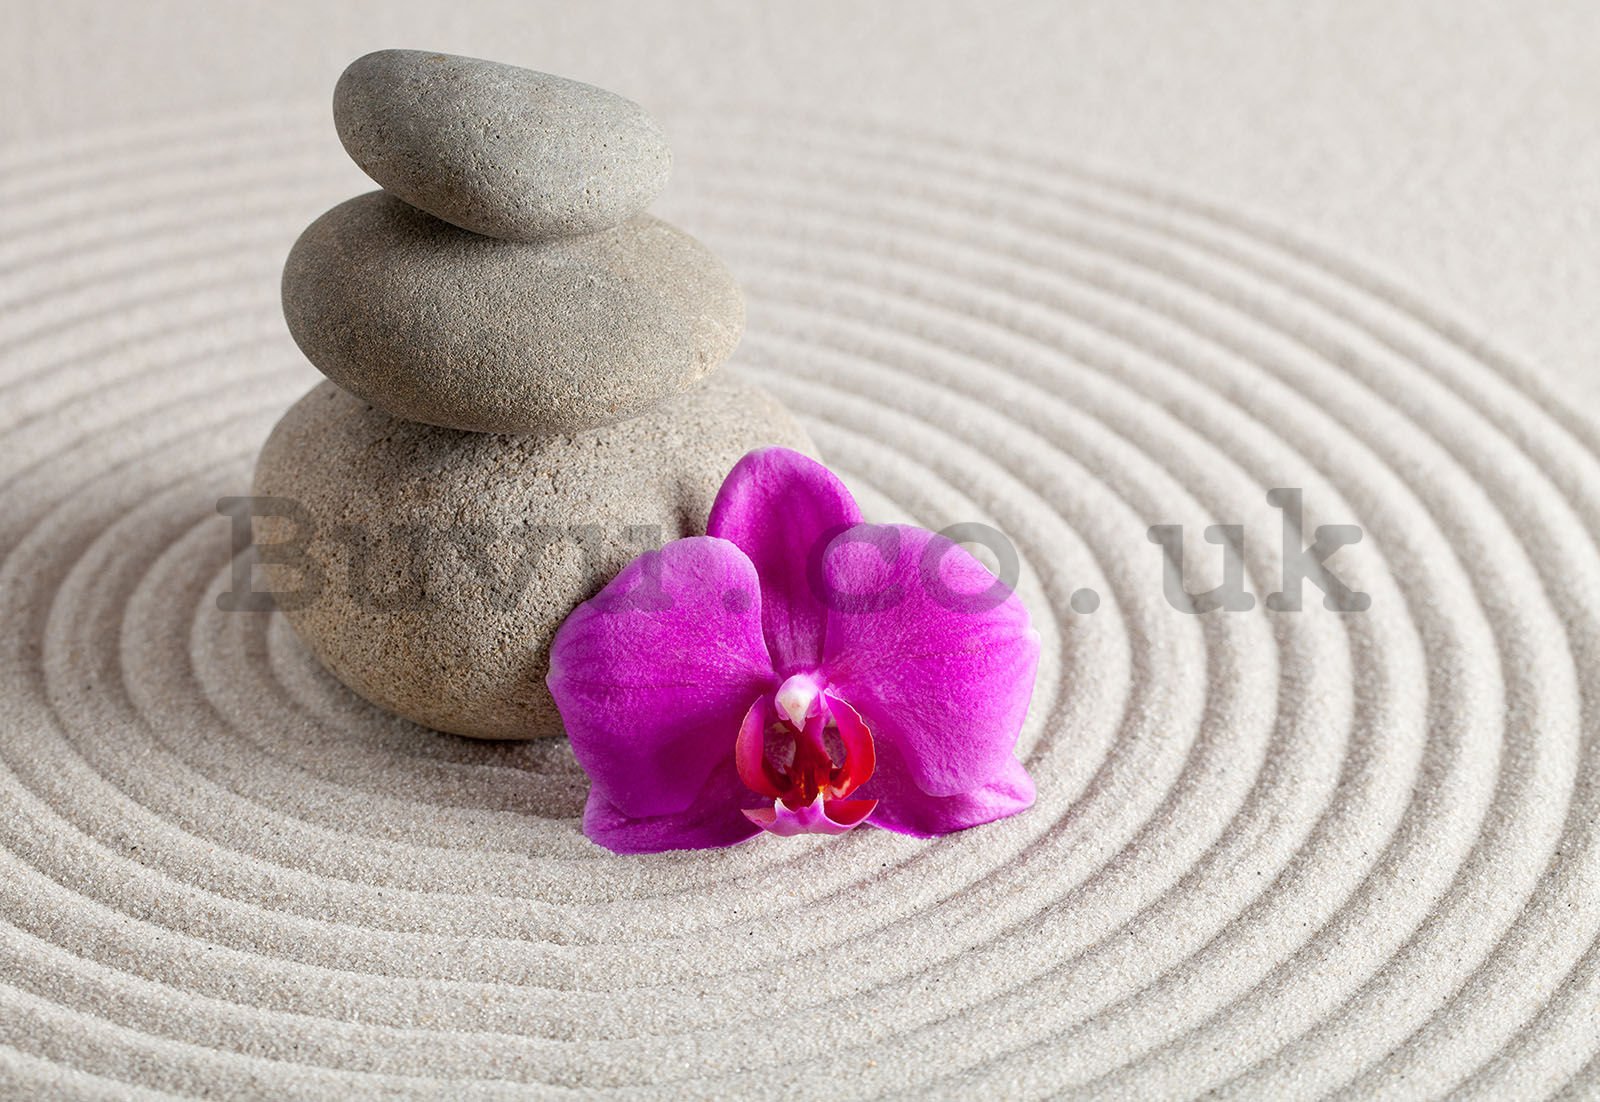 Wall mural vlies: Spa stones and orchid - 104x70,5 cm